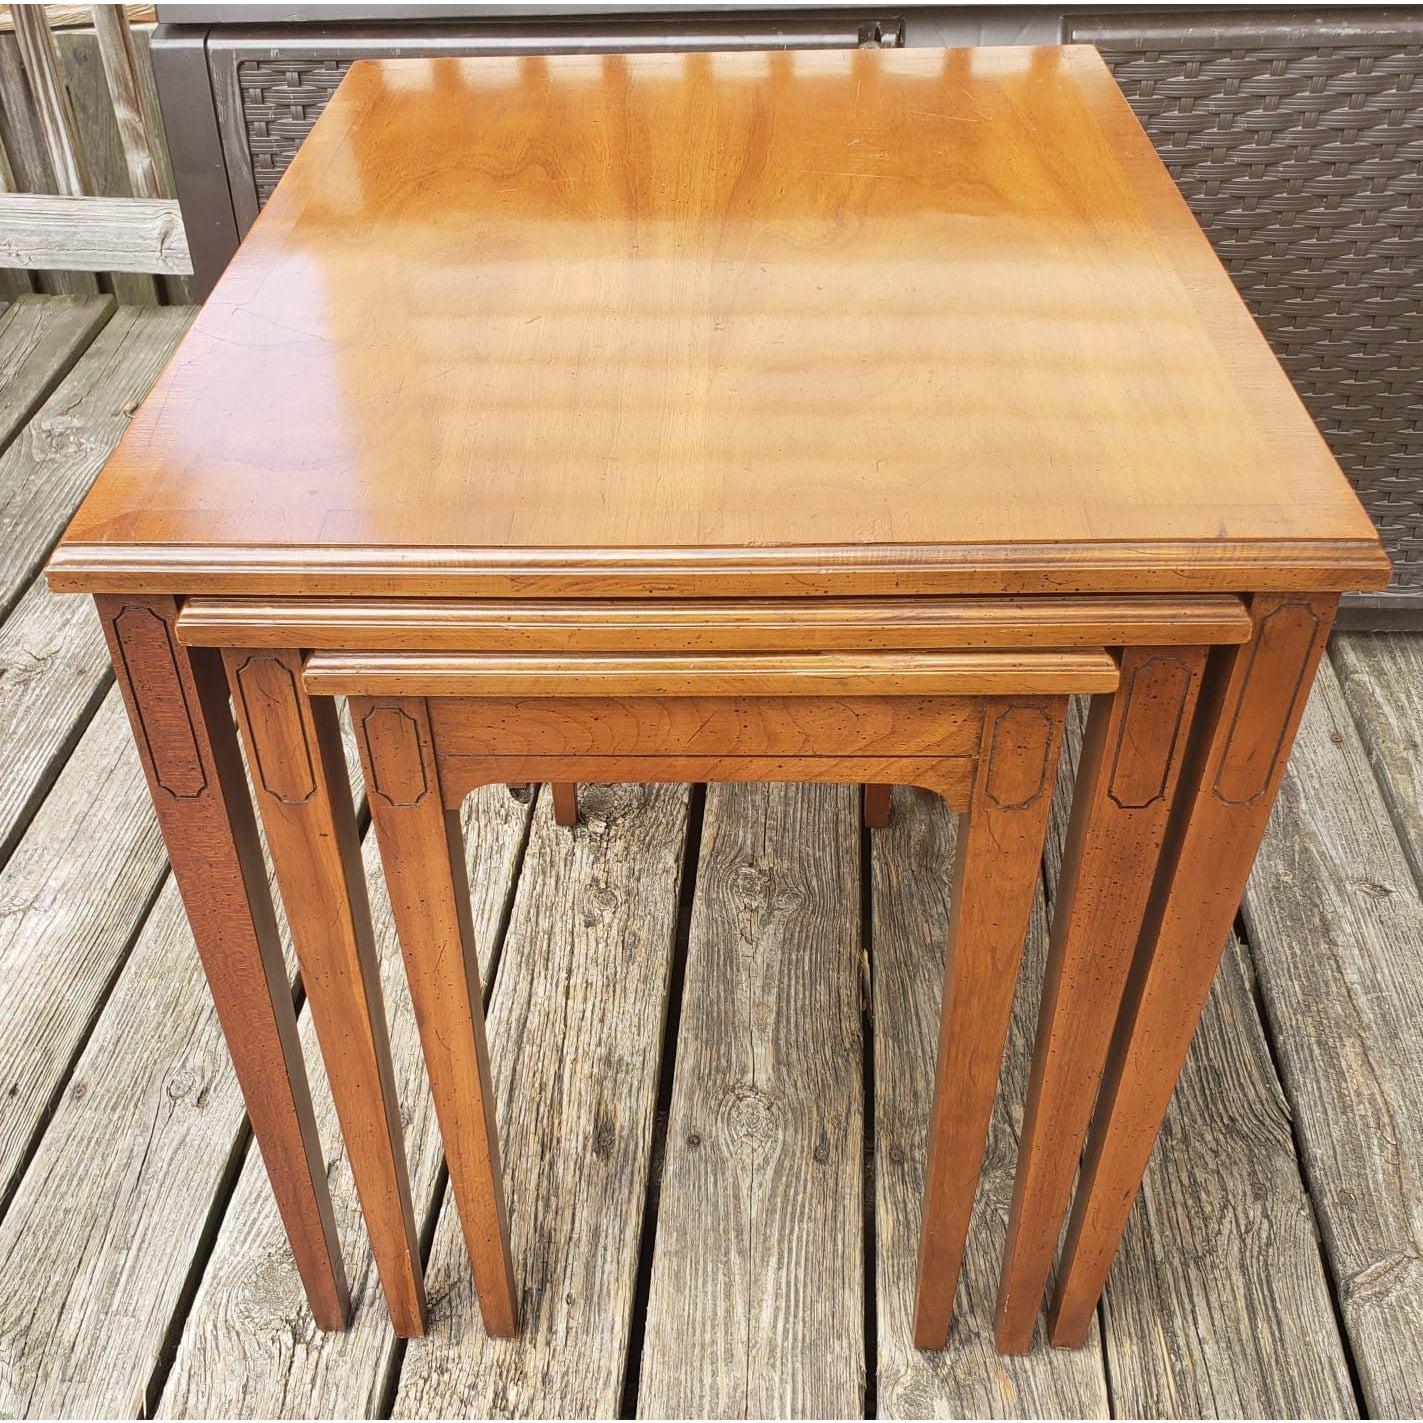 Great set Vintage Heritage Furniture Fryitwood nesting tables in great vintage condition. Built in rails for easy slide nesting. Larger Table measure 20W x 25D x 23H.
 